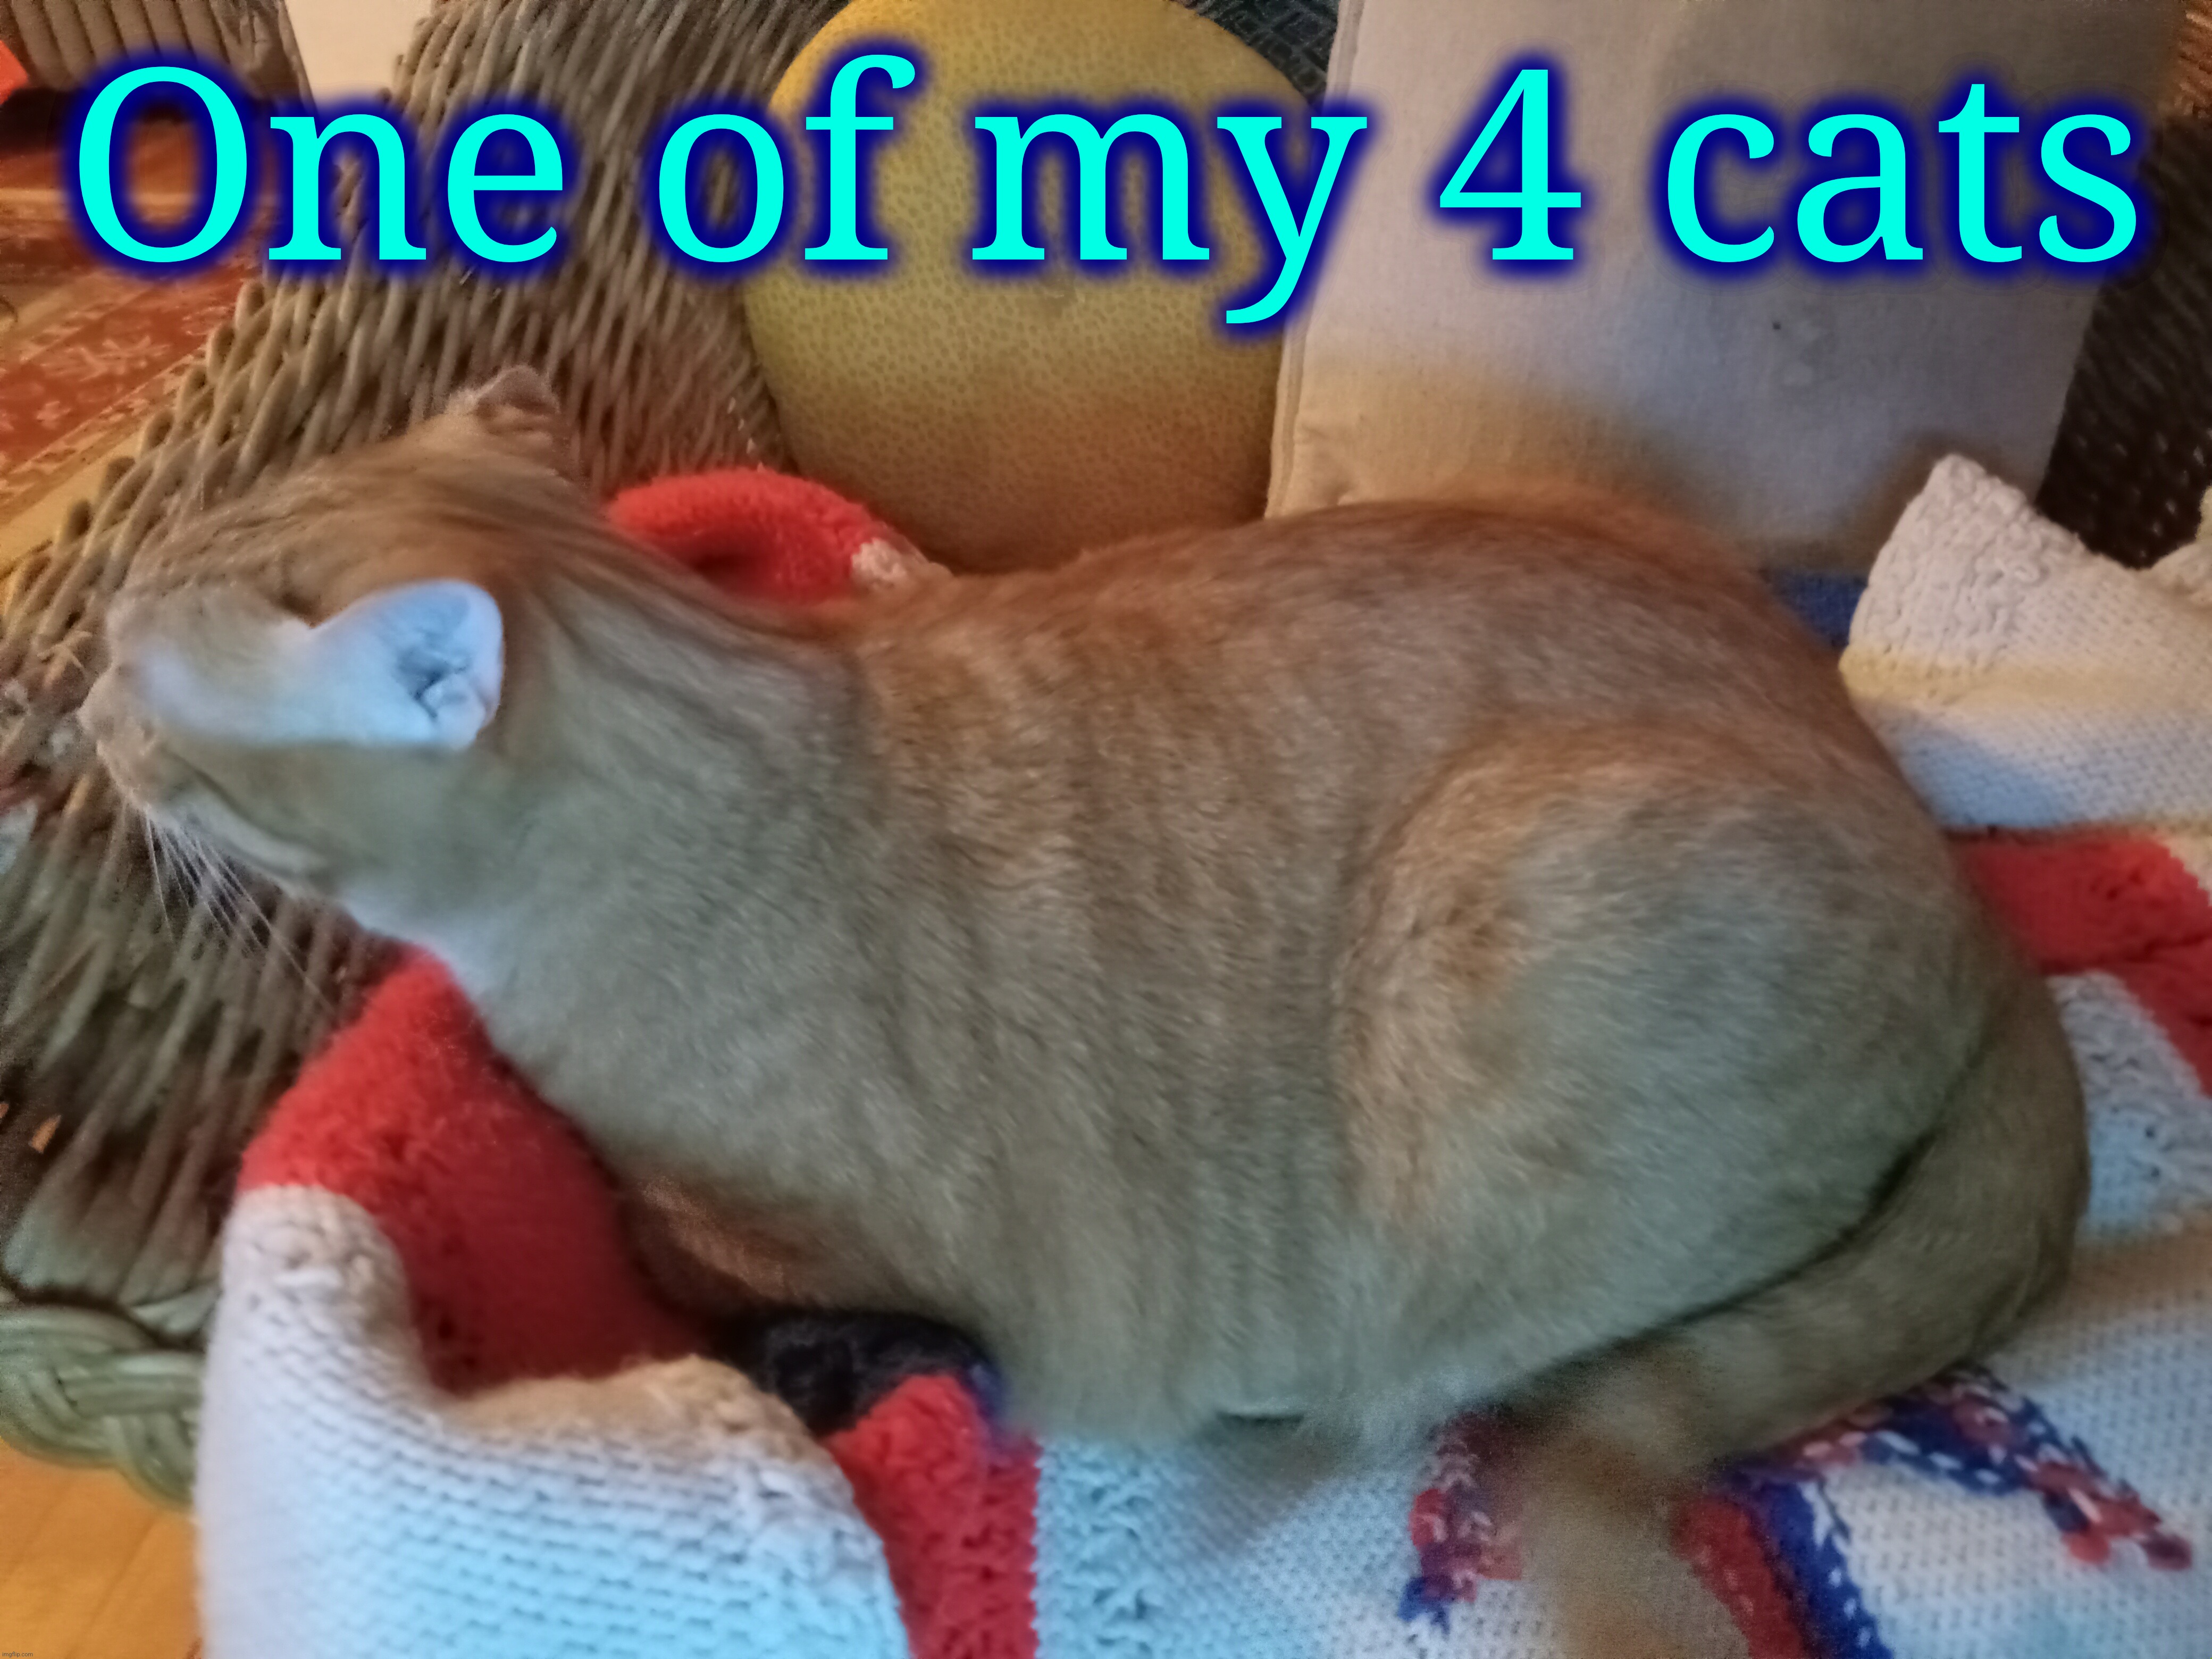 One of my 4 cats | made w/ Imgflip meme maker